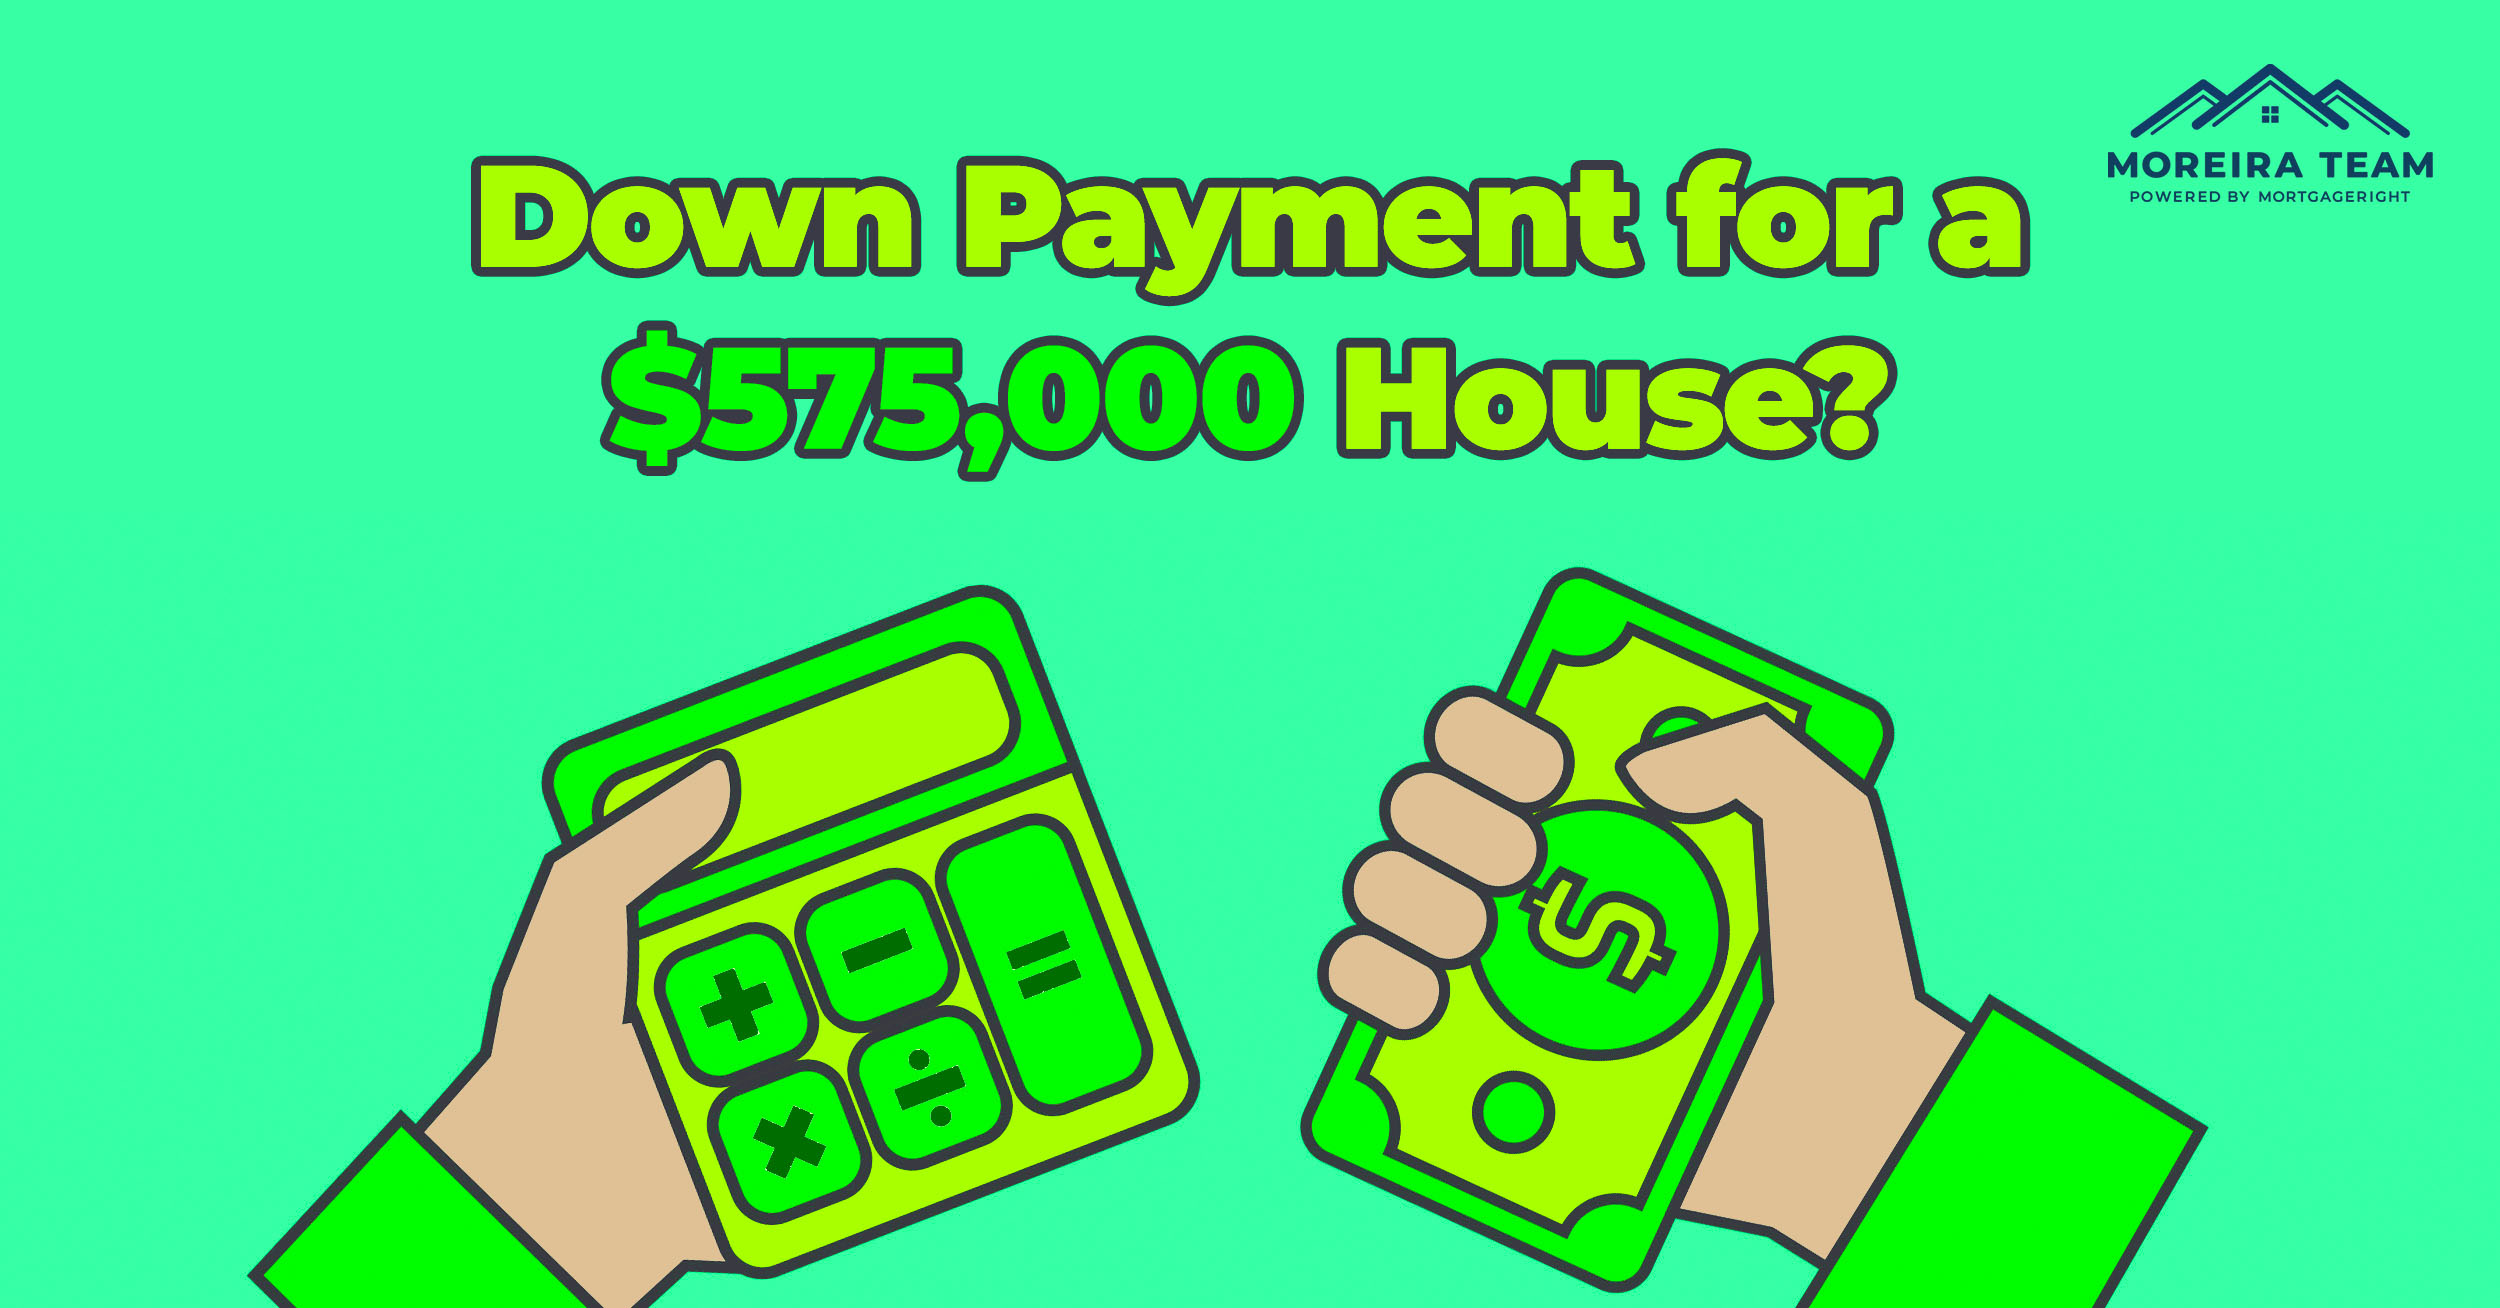 Down payment amount on a $575,000 house